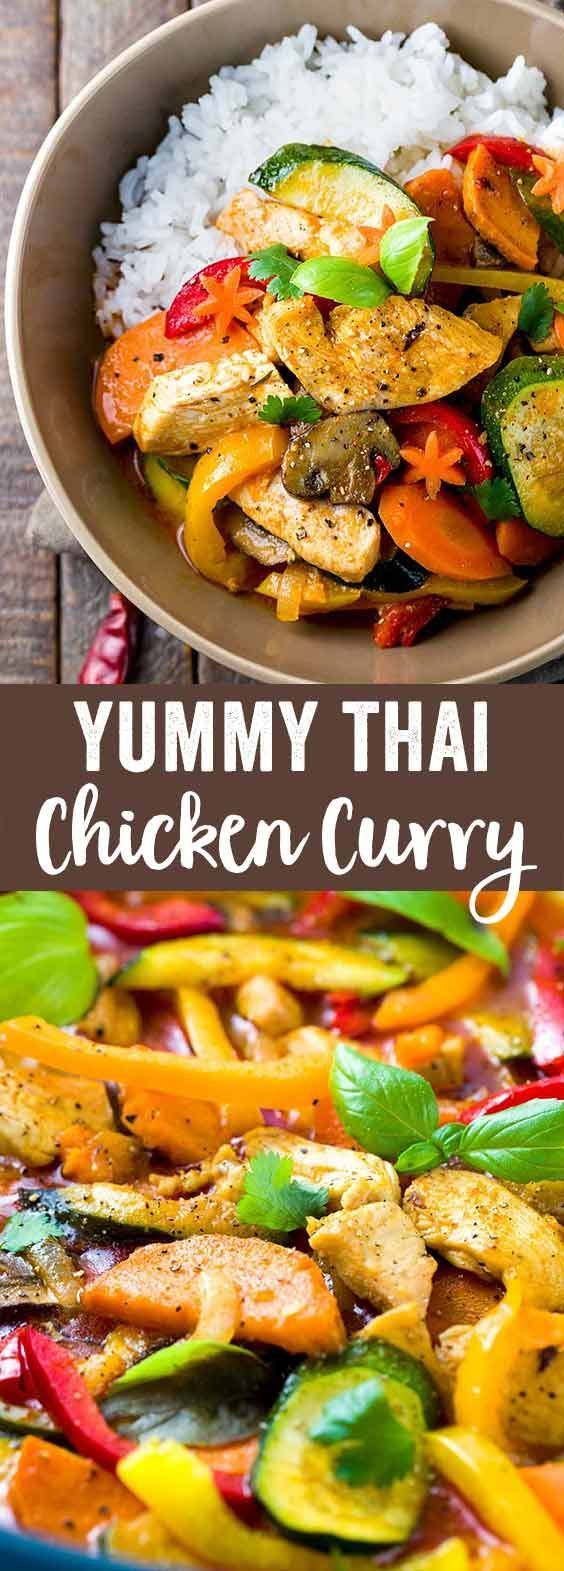 Thai Chicken Curry with Coconut Milk – A fast and easy recipe loaded with exotic flavors and healthy vegetables that you can enjoy